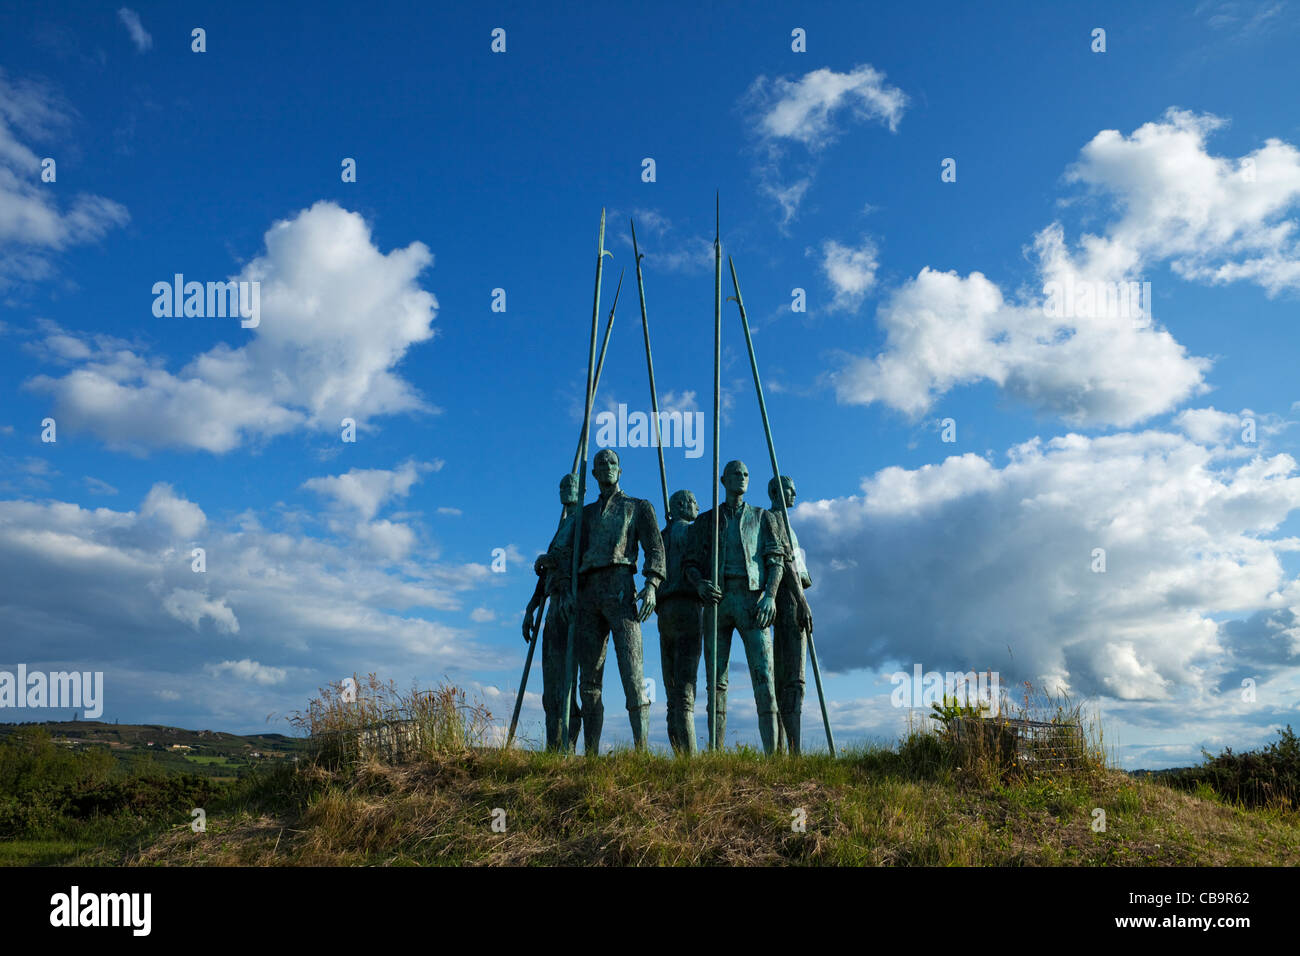 Pikemen of 1798, sculpture by Eamon O Doherty to commemorate battle victory of United Irishmen against crown forces, County Wexford, Ireland Stock Photo